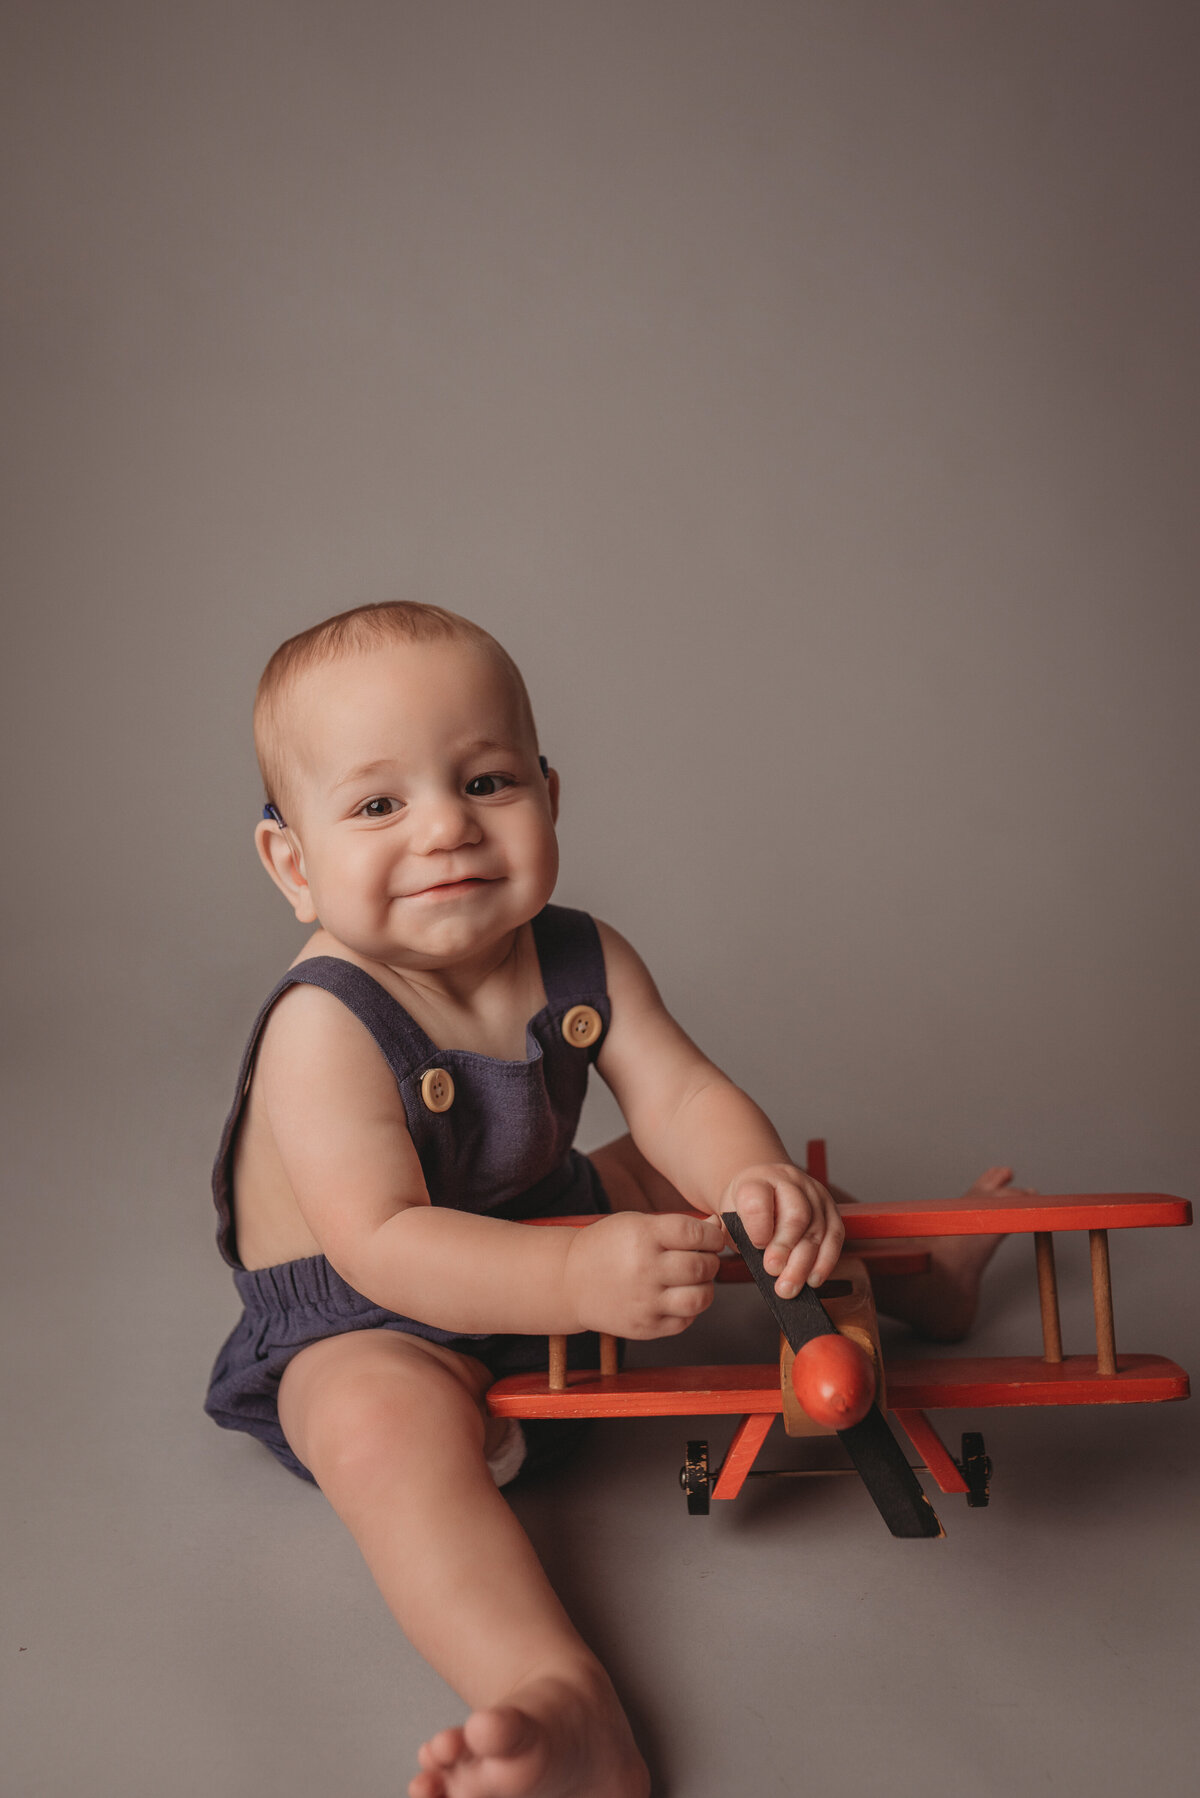 One year old baby boy sitting next to a wooden toy airplane smiling, wearing a dark blue jumper on light gray backdrop